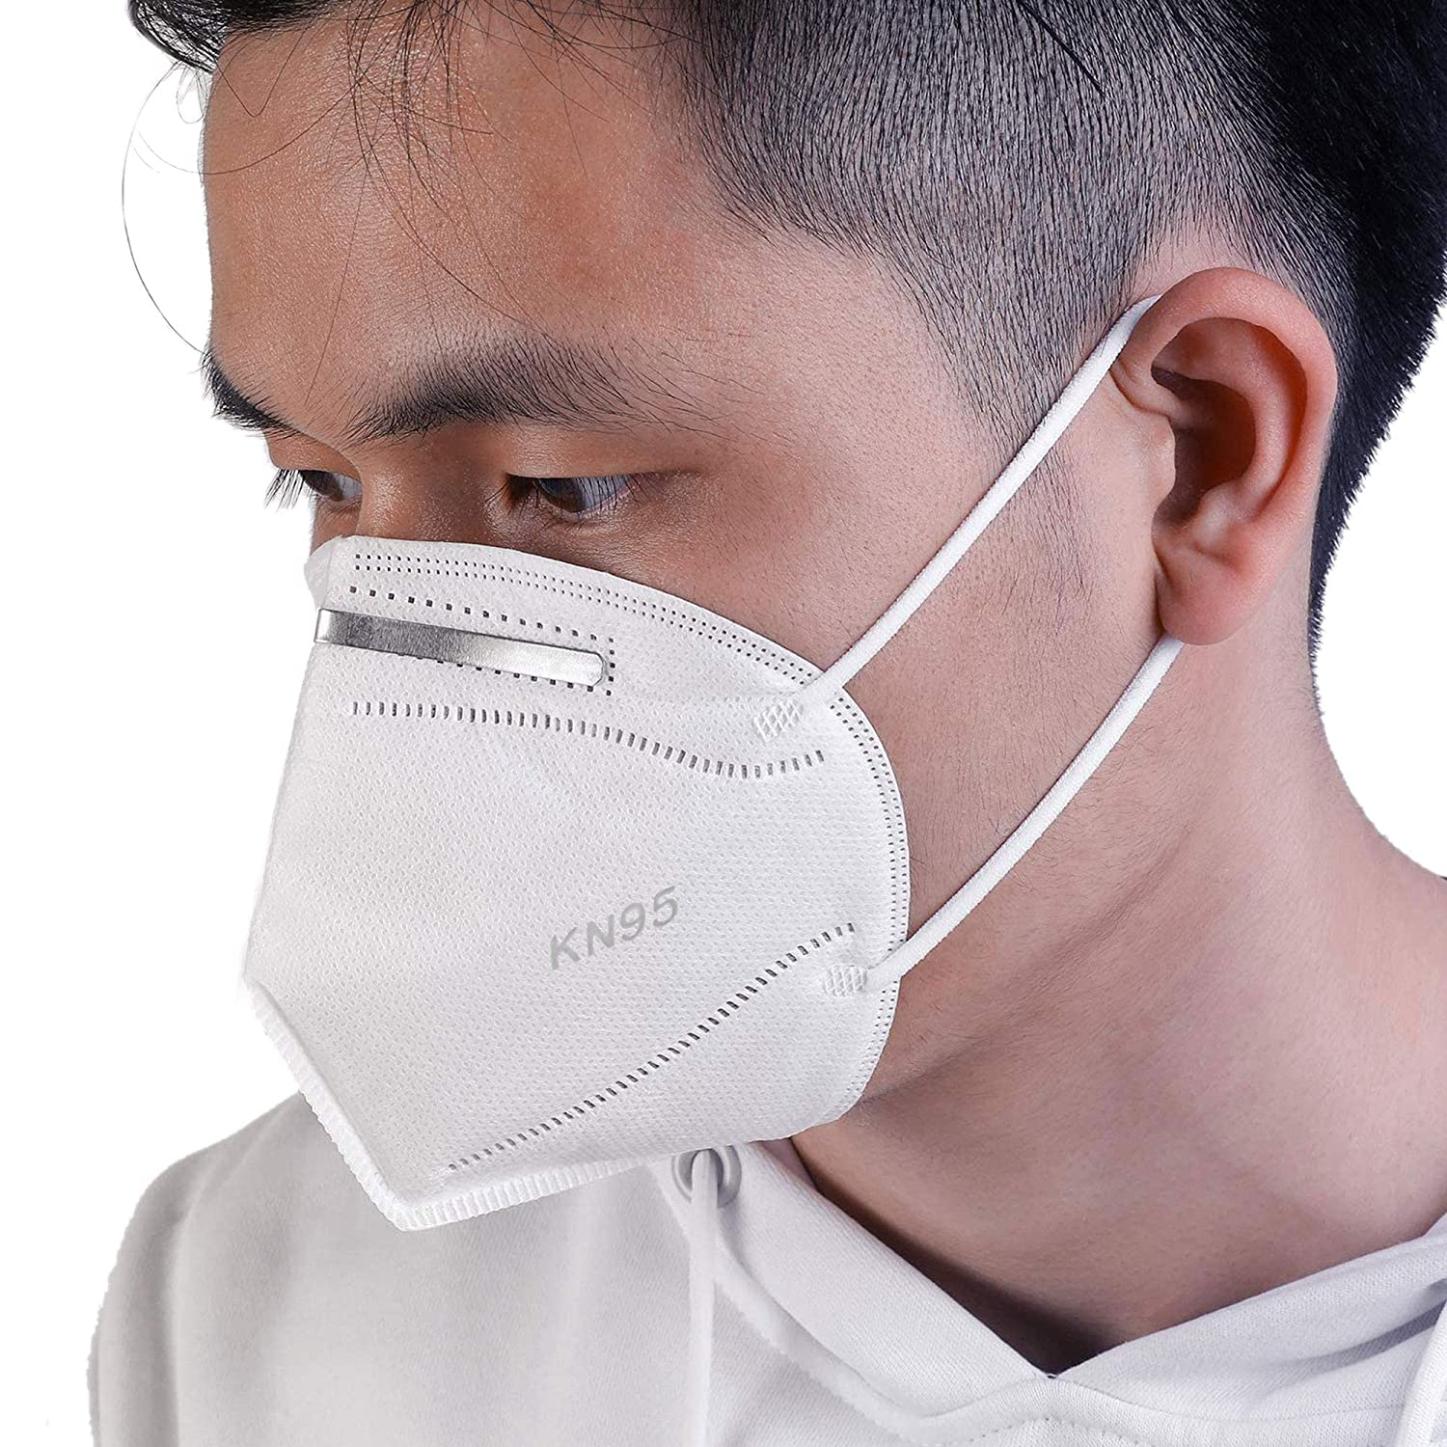 N95 Masks: What Are They and How Do They Work?